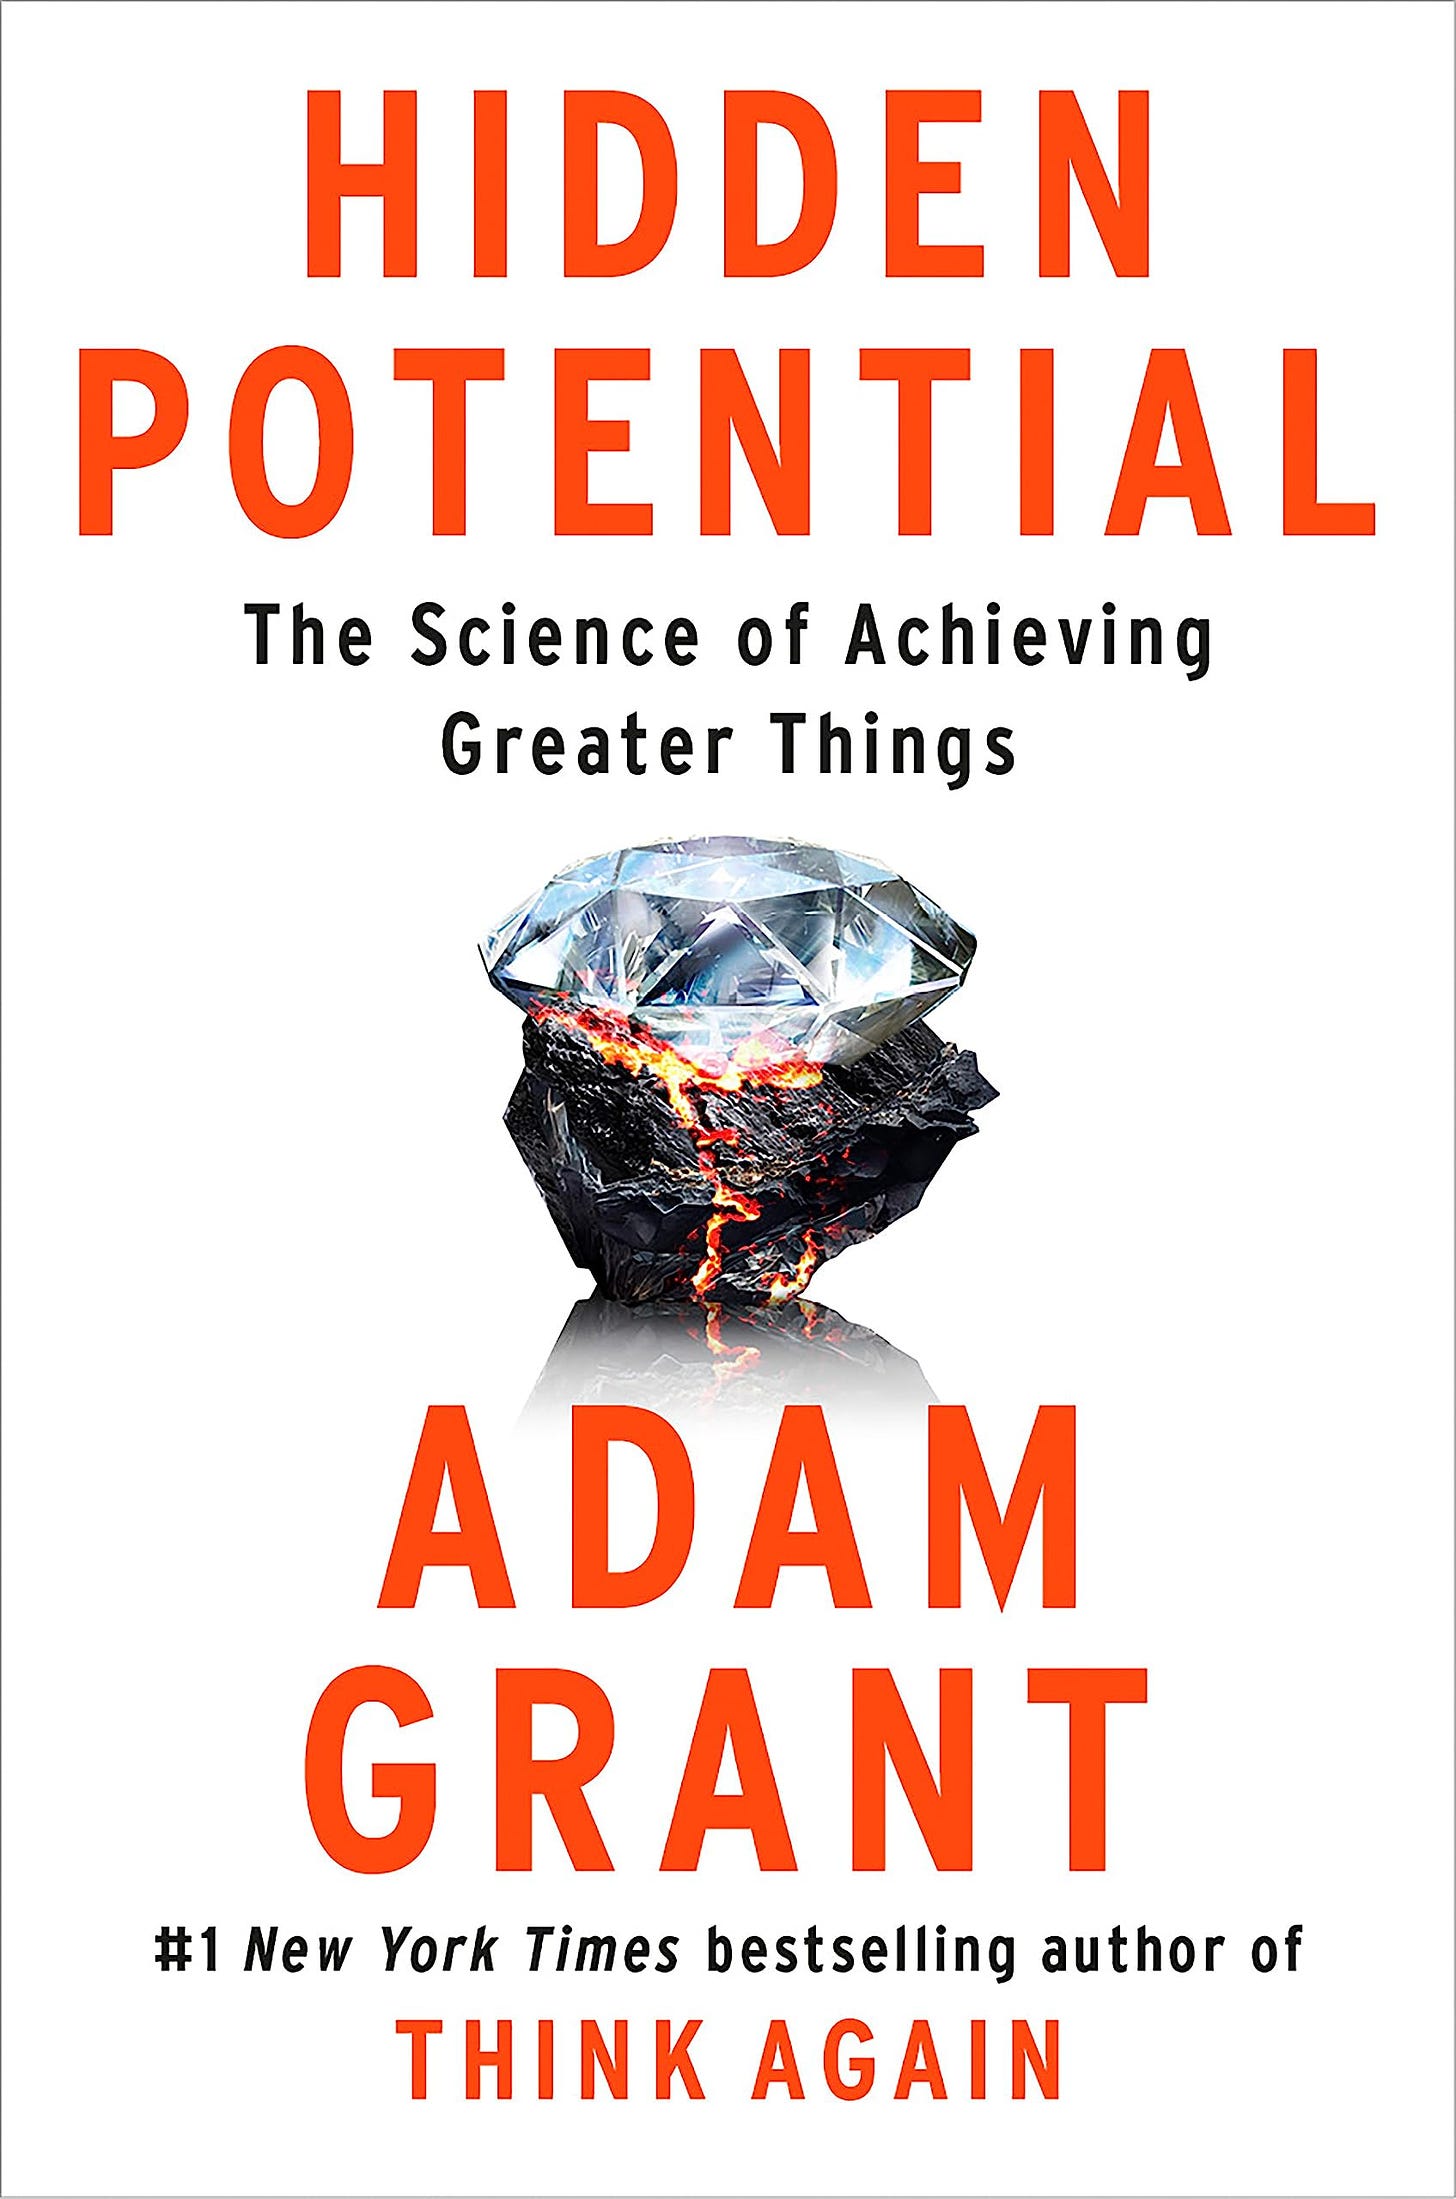 Hidden Potential: The Science of Achieving Greater Things eBook : Grant,  Adam: Kindle Store - Amazon.com